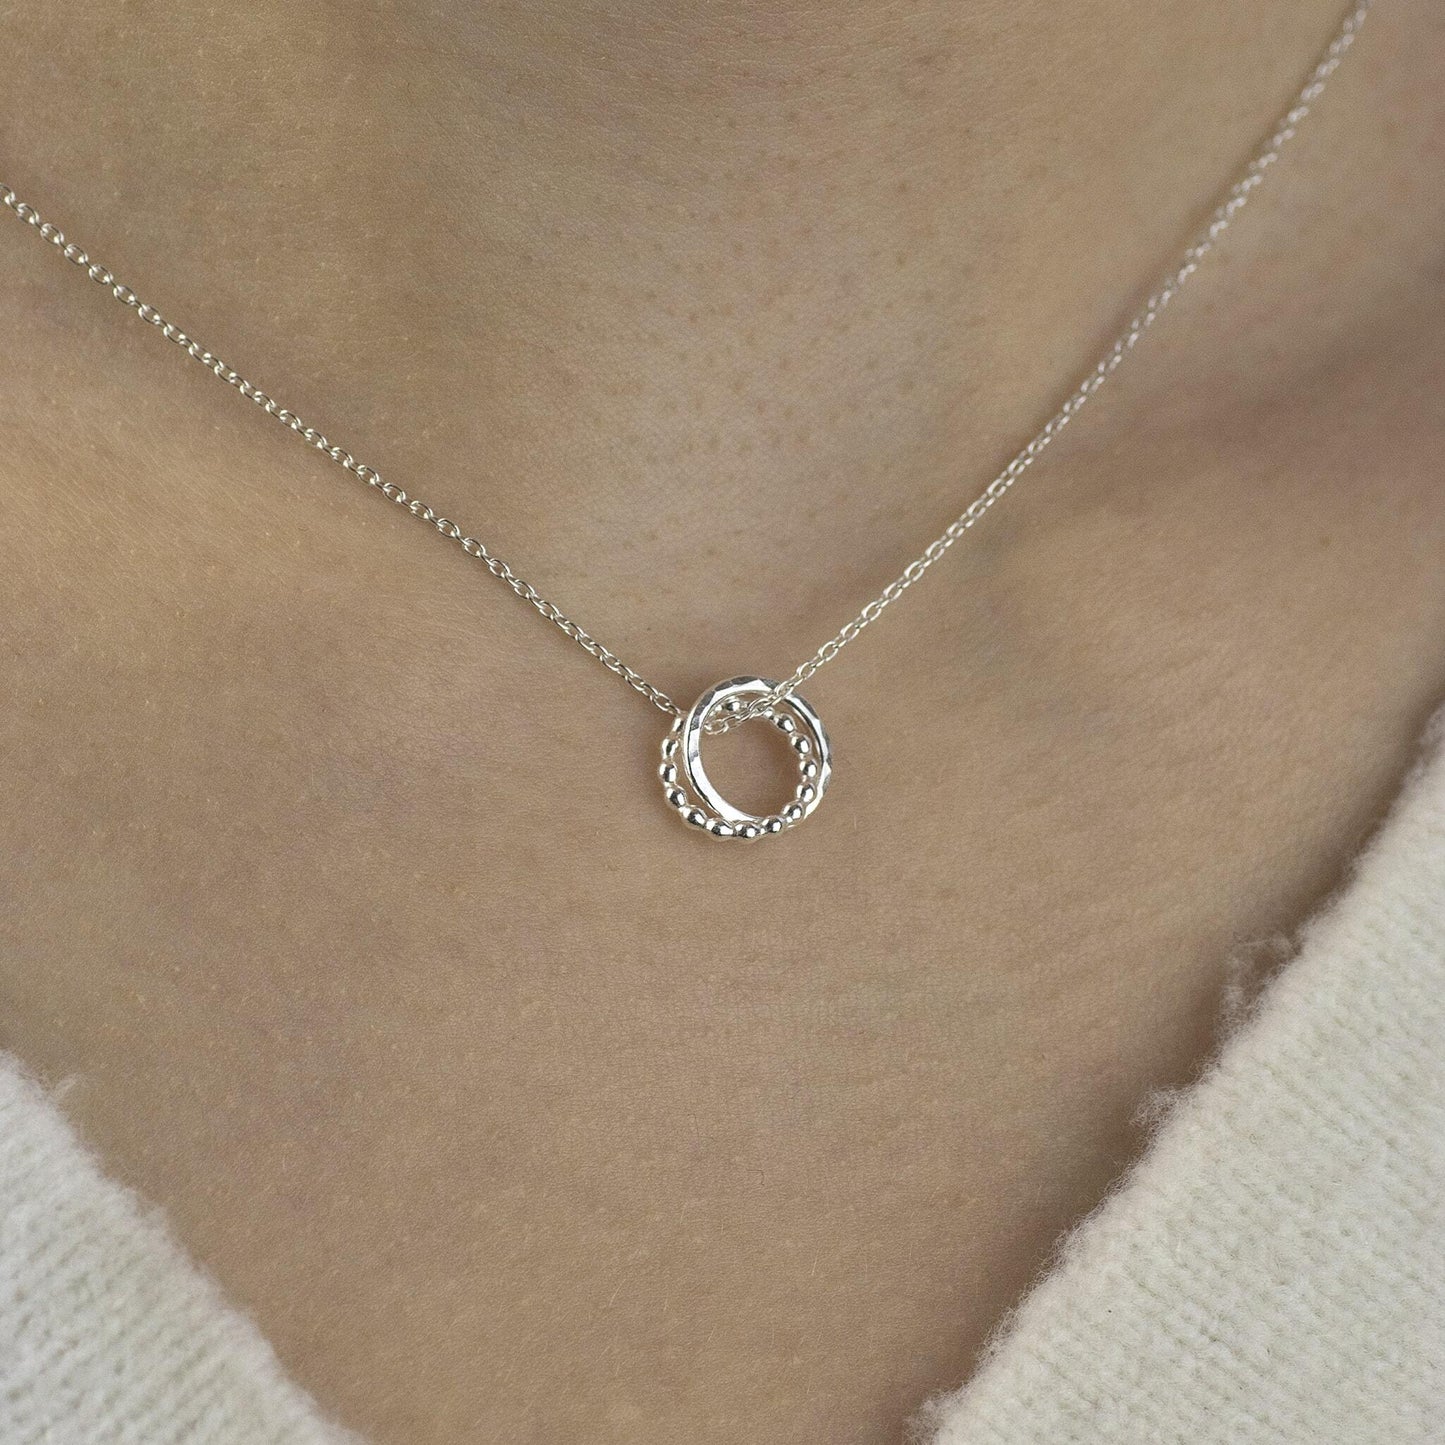 Friends Necklace - Gift for Friend - Silver Love Knot Necklace